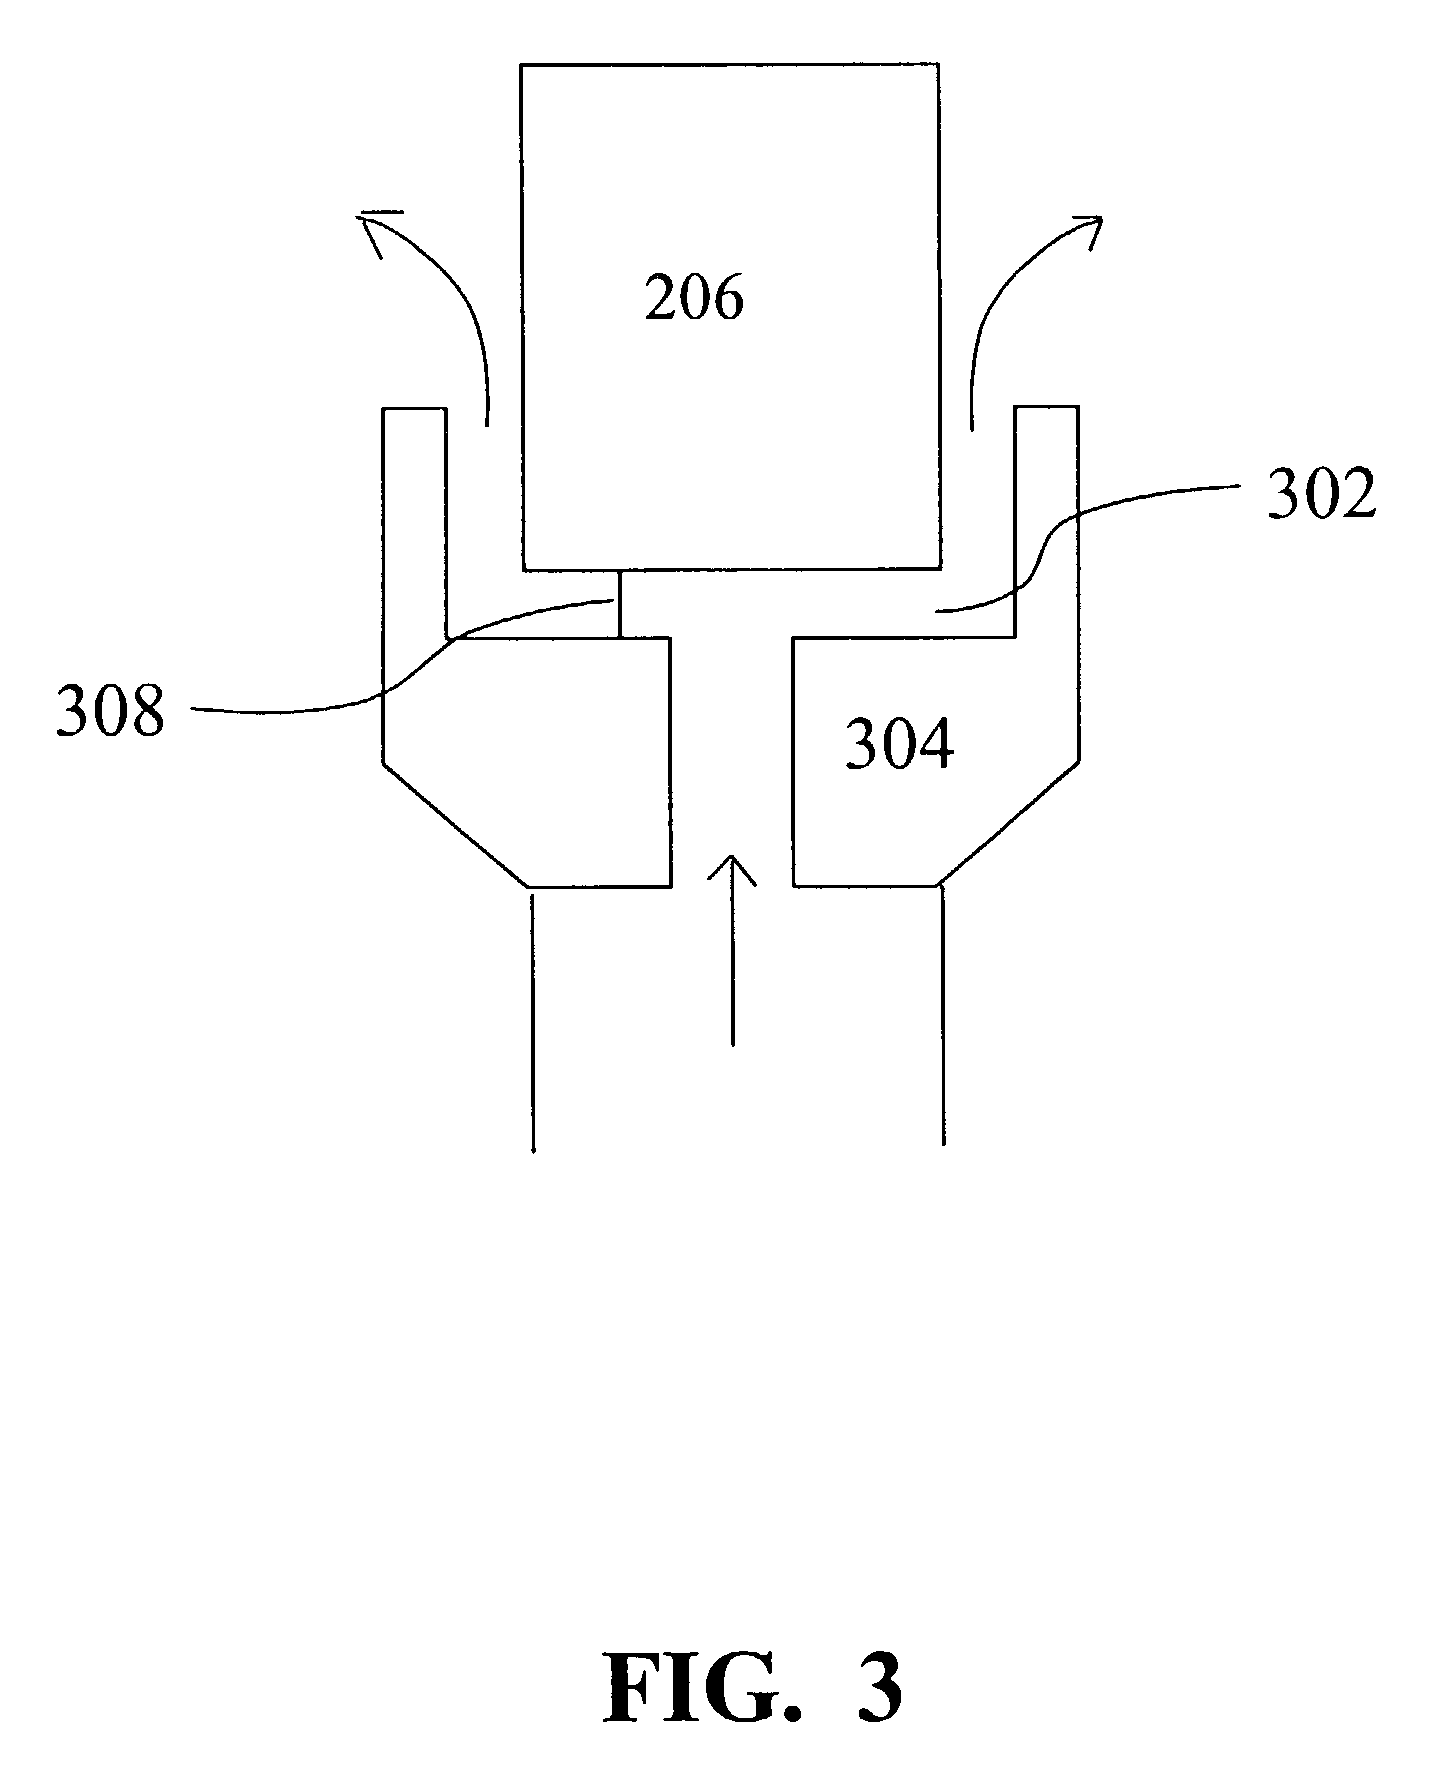 Method to treat emulsified hydrocarbon mixtures